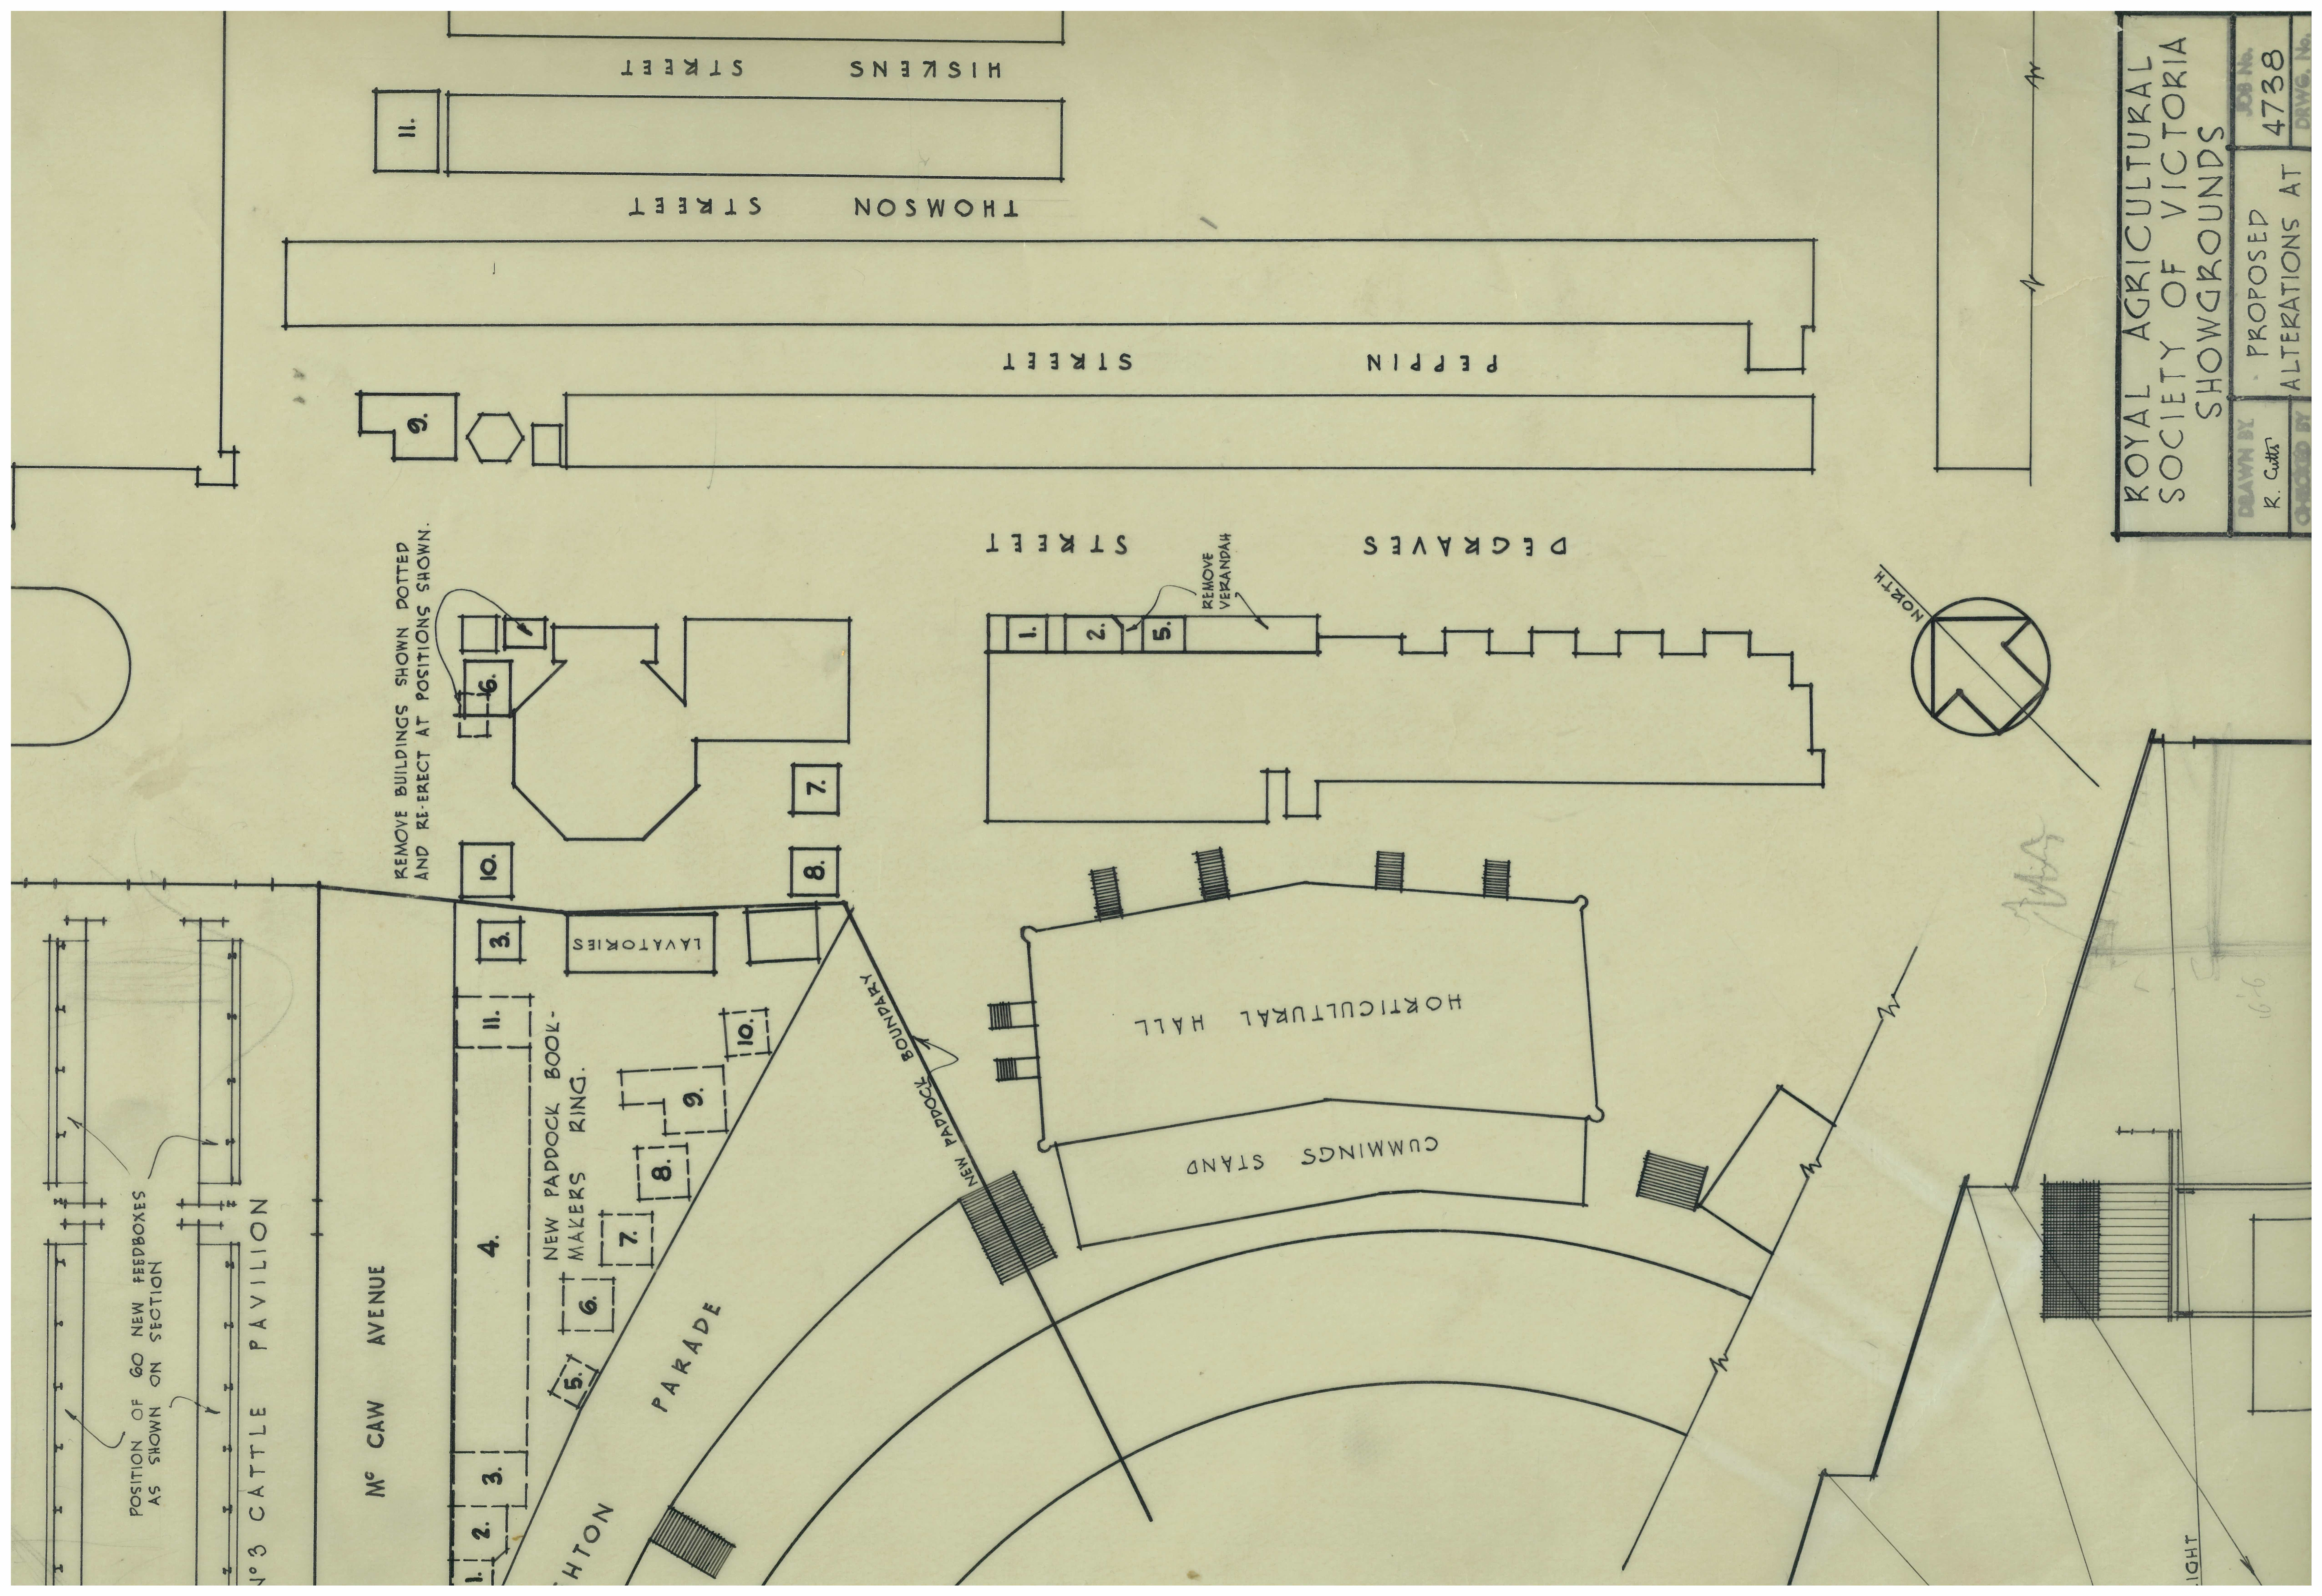 A blueprint of the Showgrounds from 1948 showing the Cumming Stand. Melbourne Royal Heritage Collection.